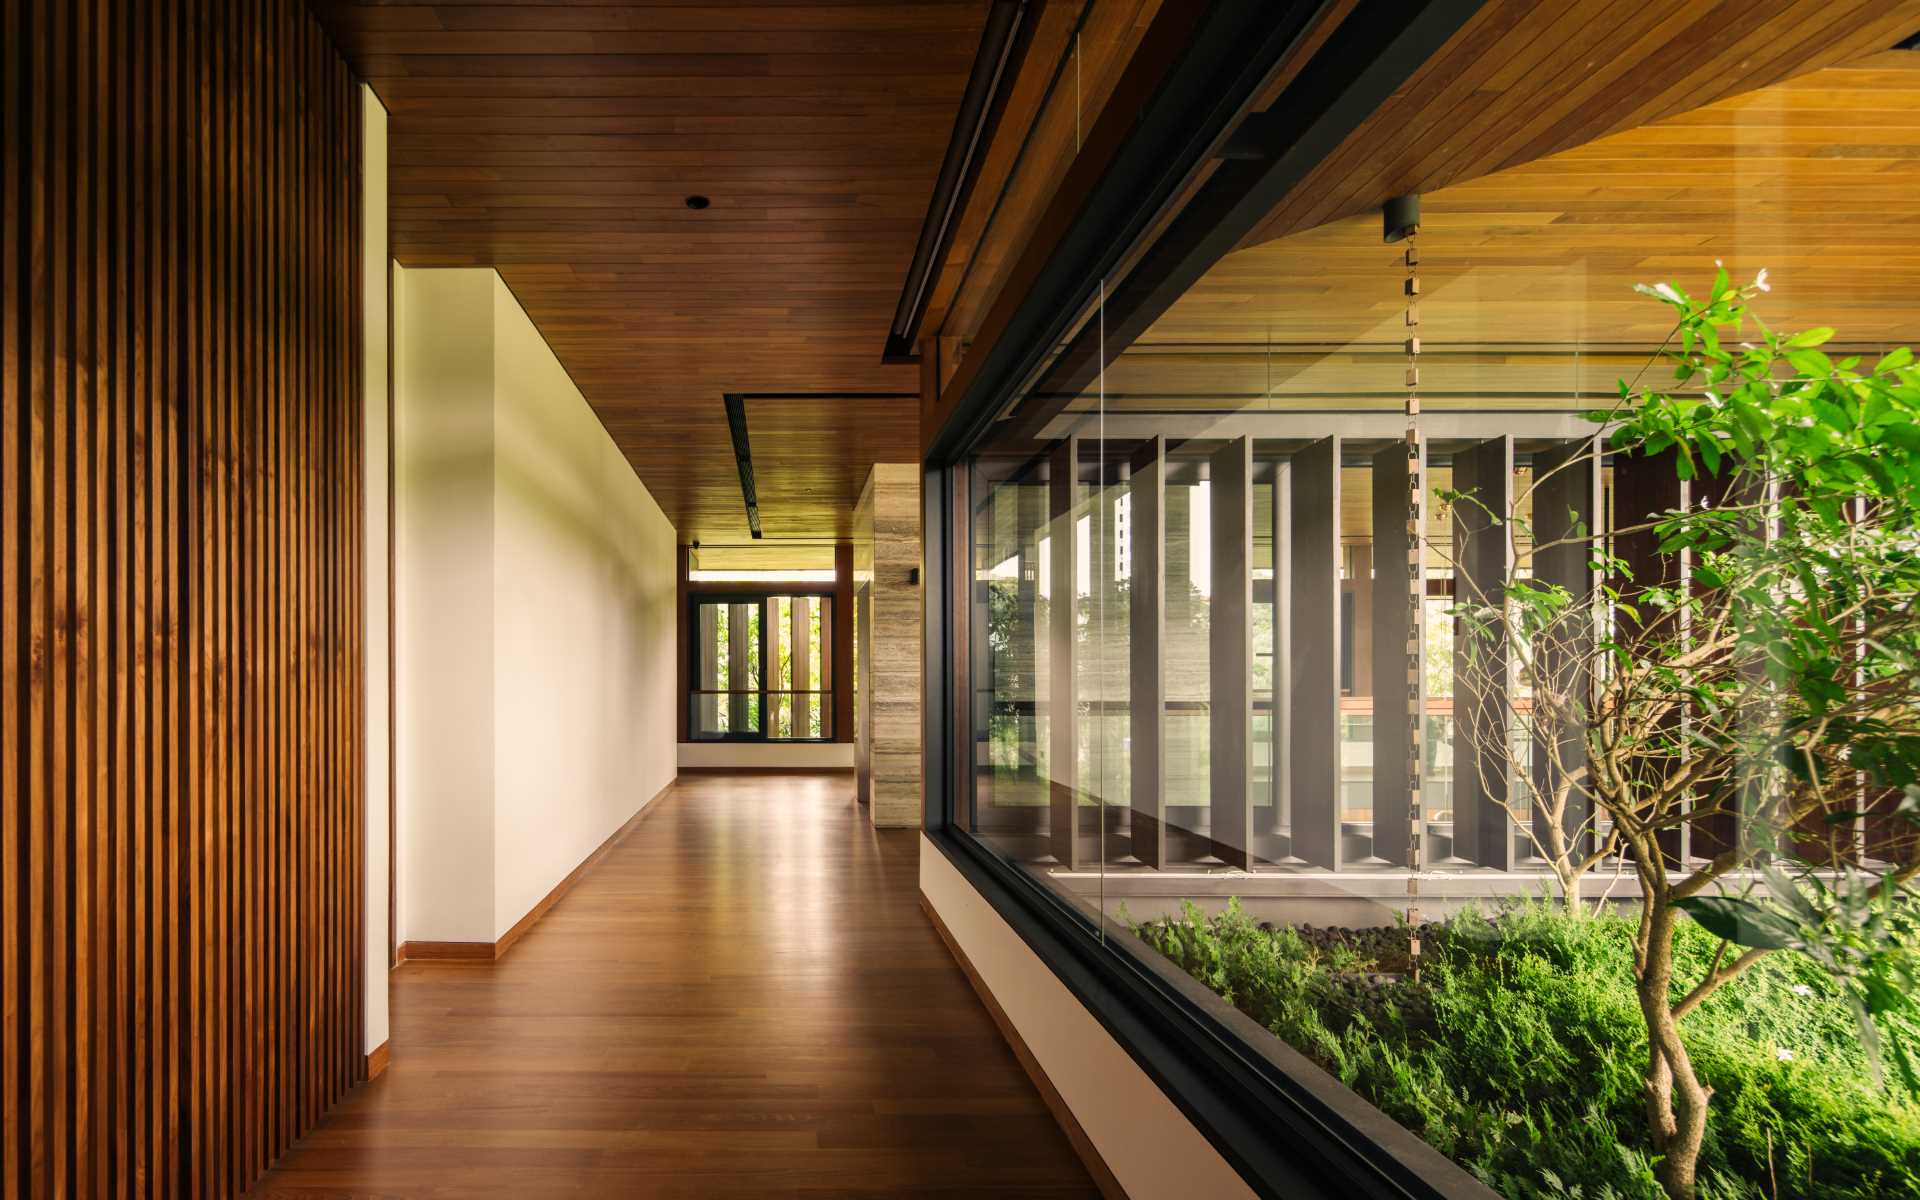 A modern home with glass-lined hallways and wood floors.